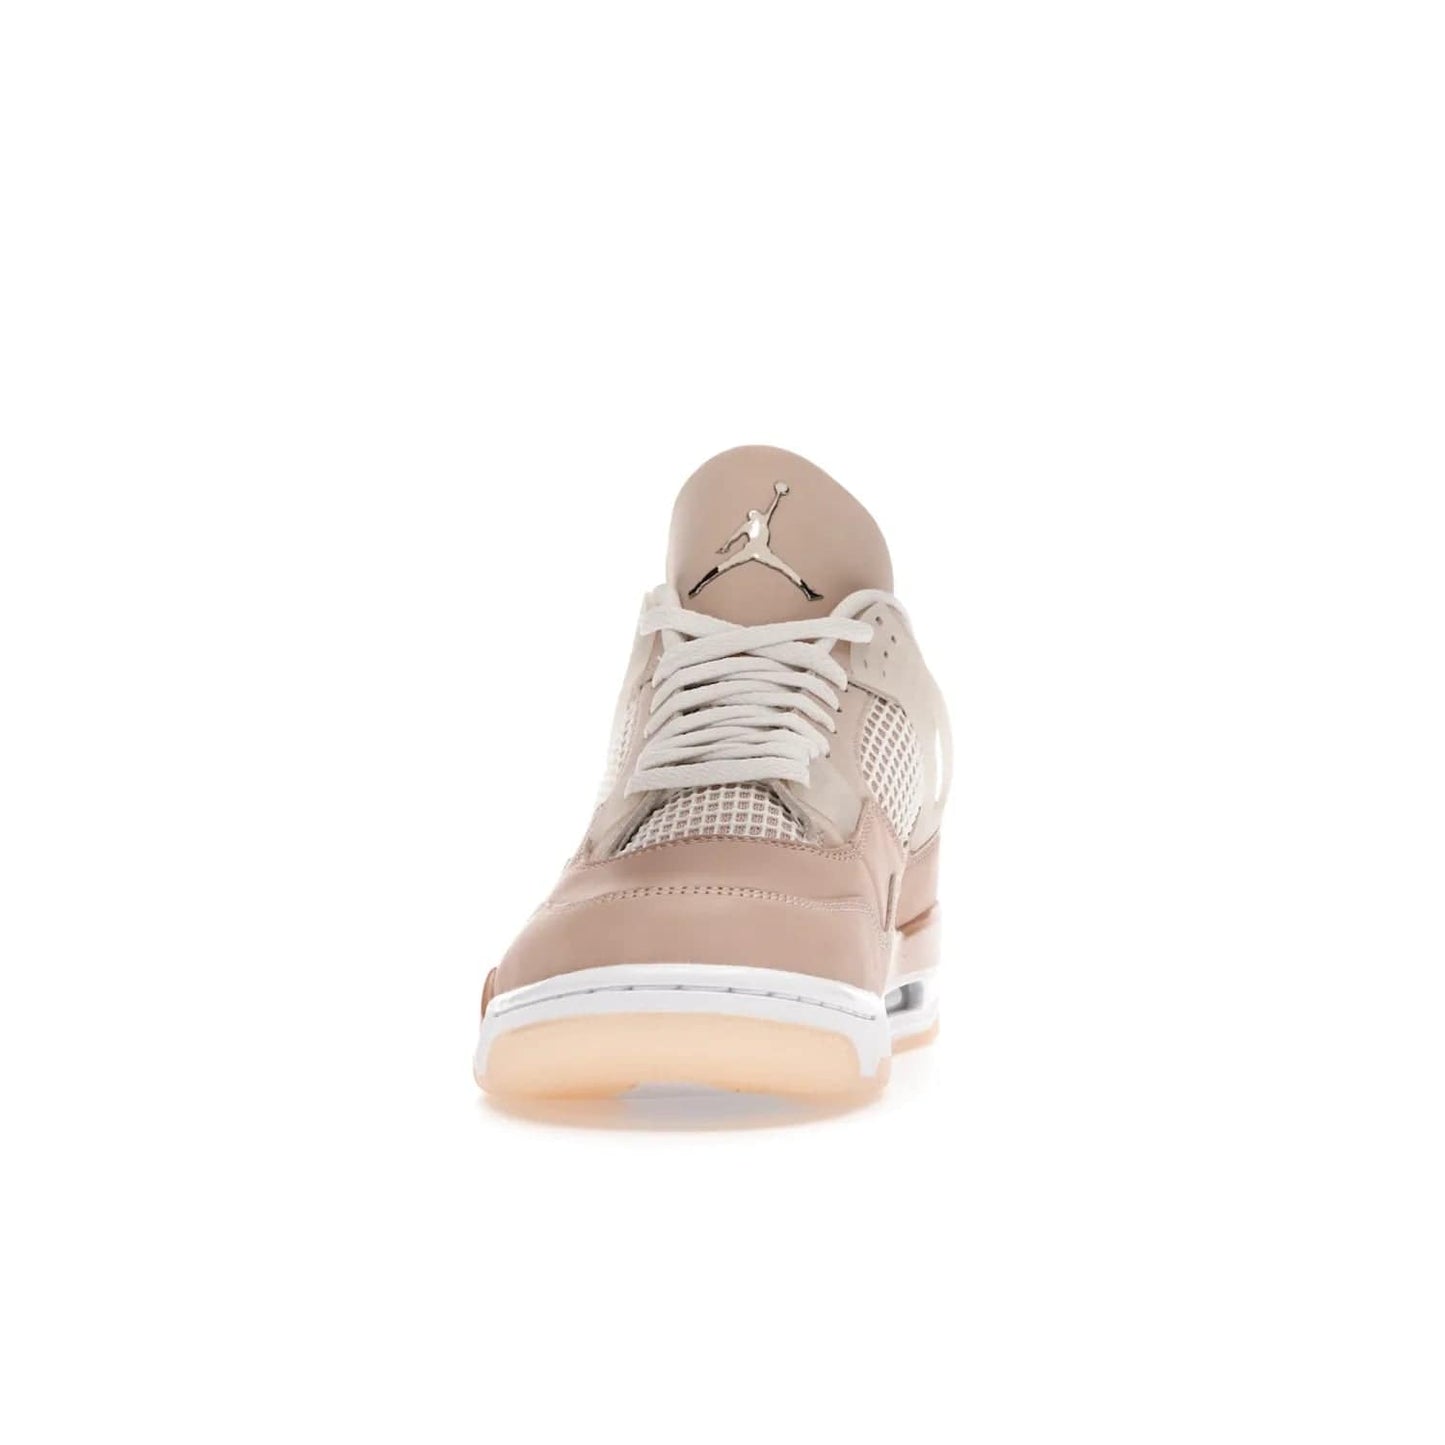 Jordan 4 Retro Shimmer (Women's) - Image 11 - Only at www.BallersClubKickz.com - Air Jordan 4 Shimmer (W): A women's-exclusive design with a buttery beige upper and Silver/Orange Bronze details. Durabuck and metallic Jumpman branding elevate the iconic silhouette. Shop now.